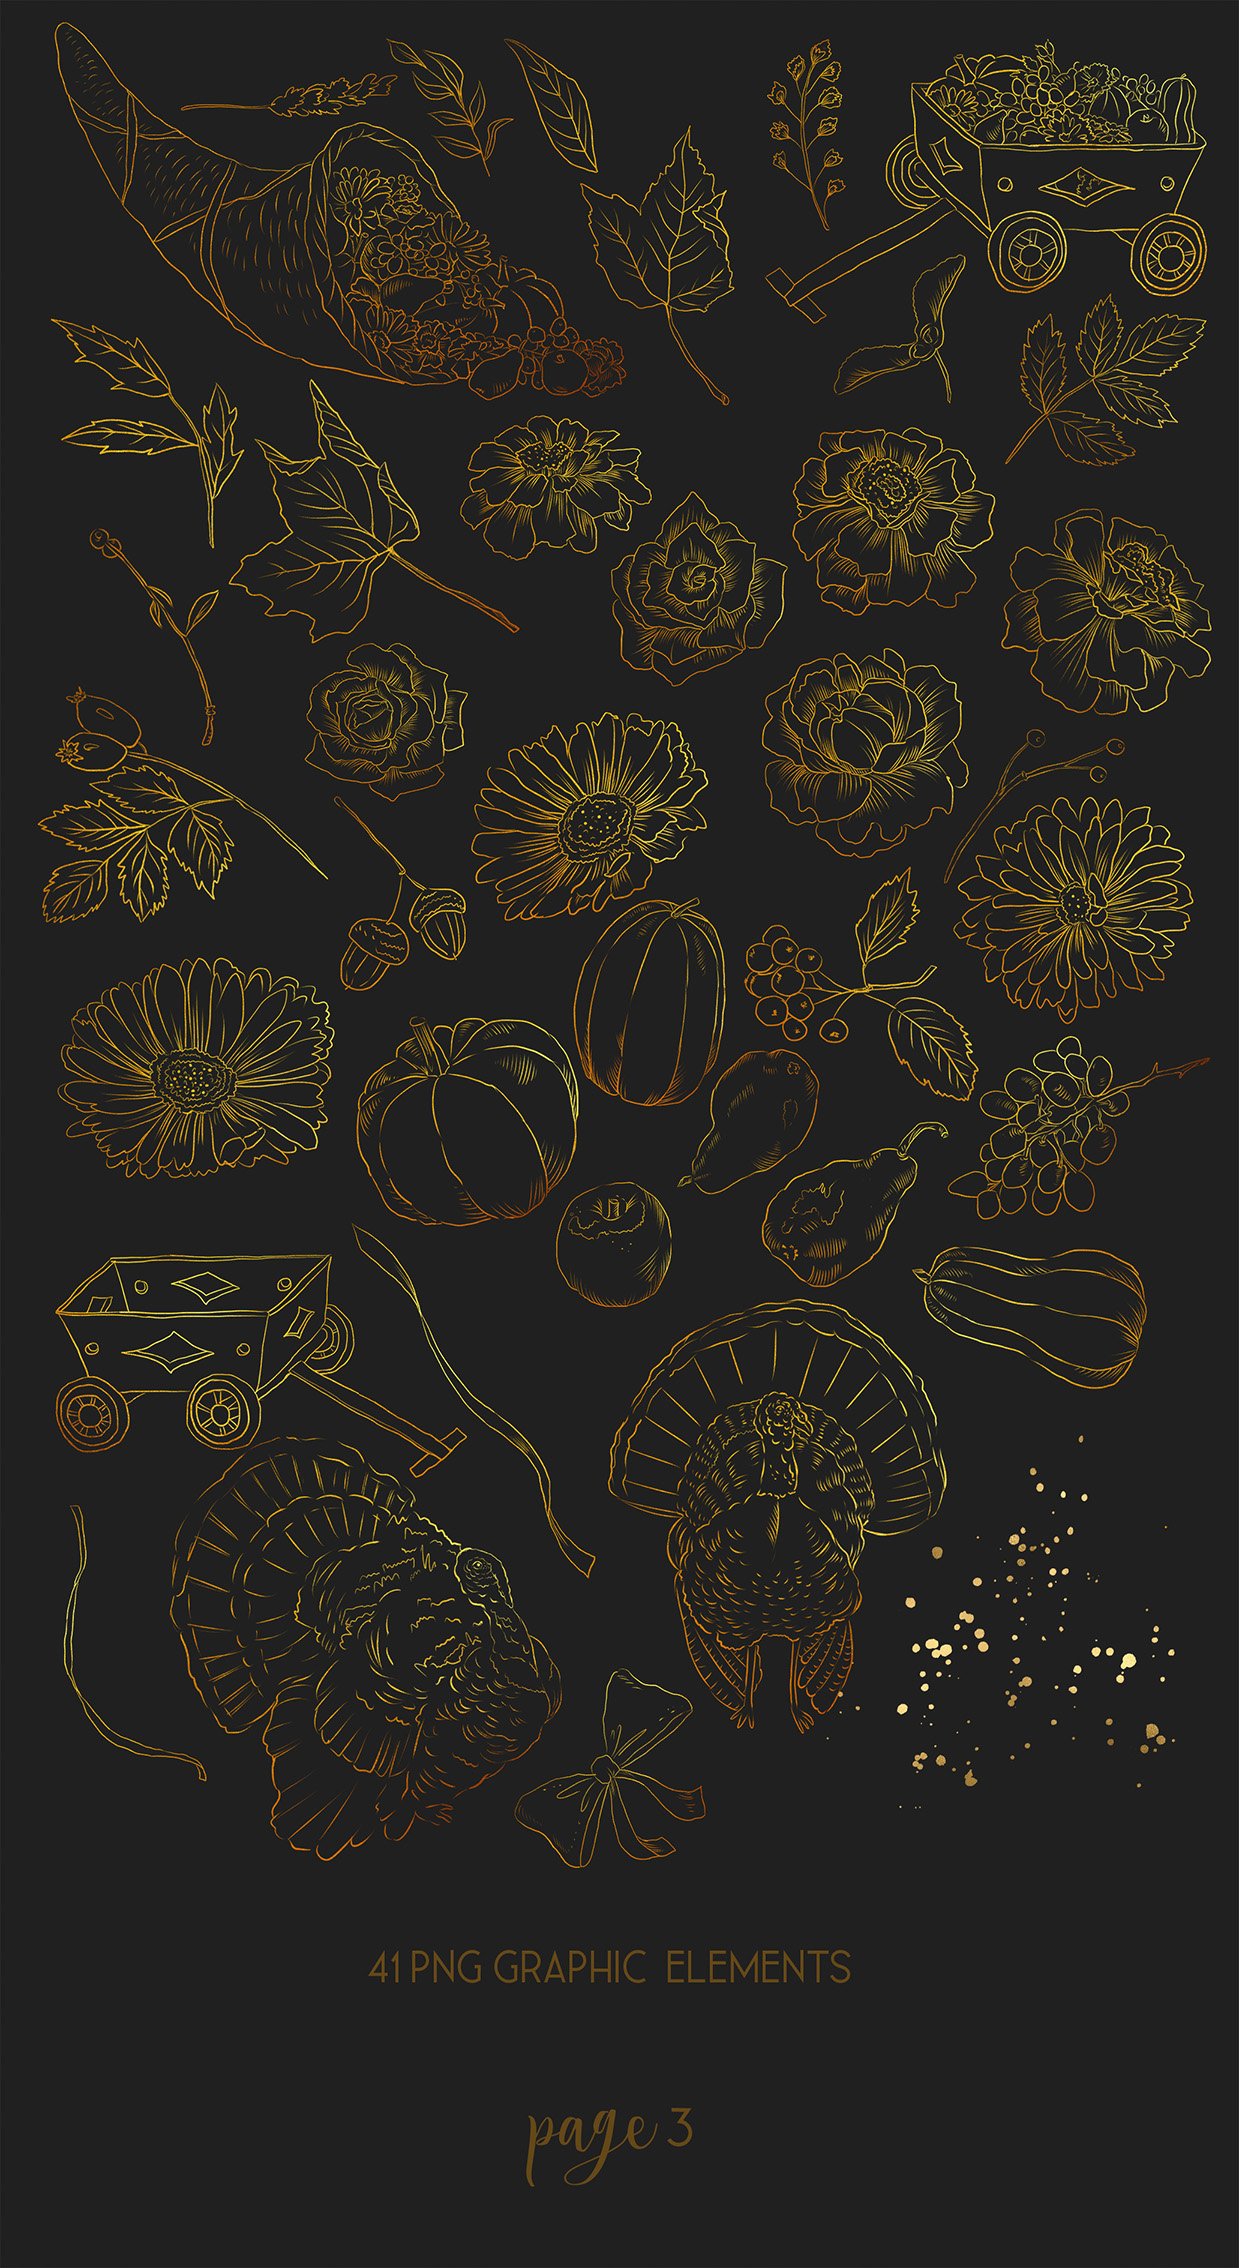 Black background with gold outline autumn elements.